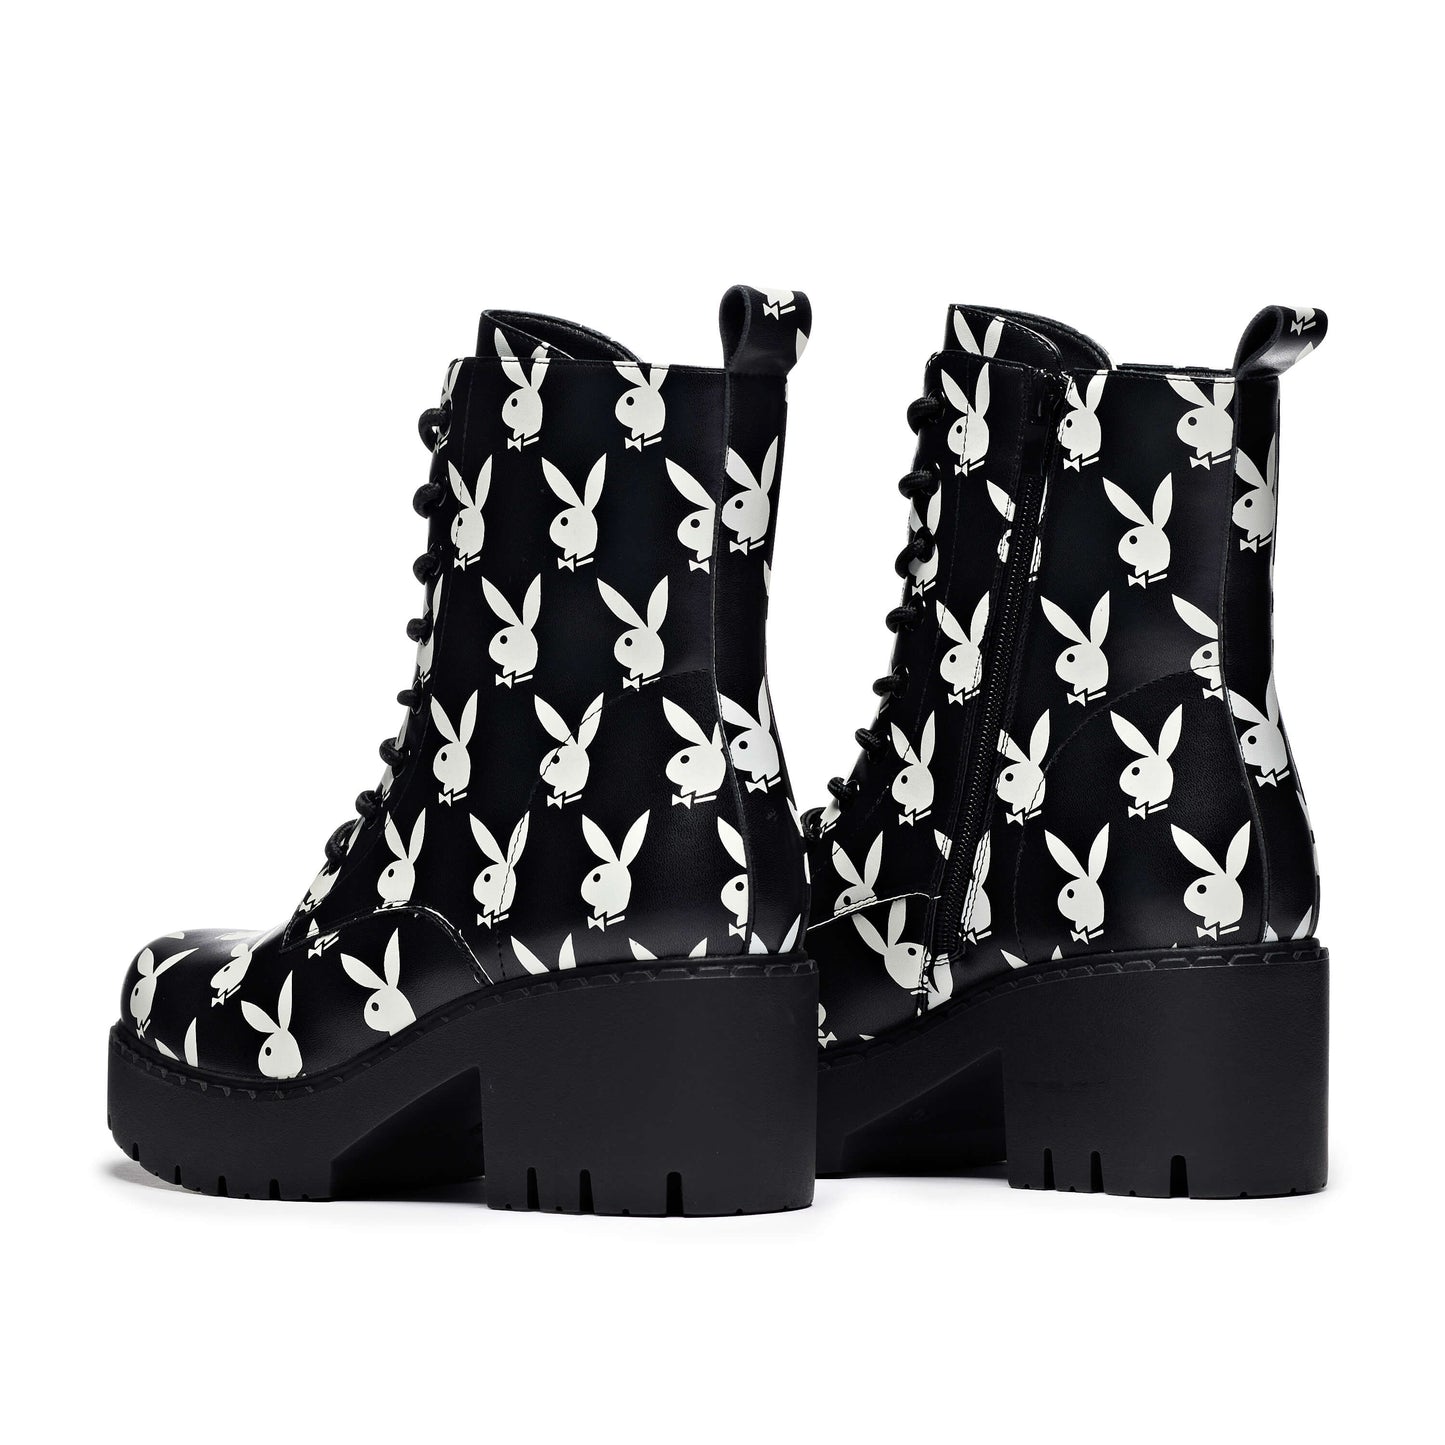 Playboy Reprise White Switch Boots - Ankle Boots - KOI Footwear - Black - Back View